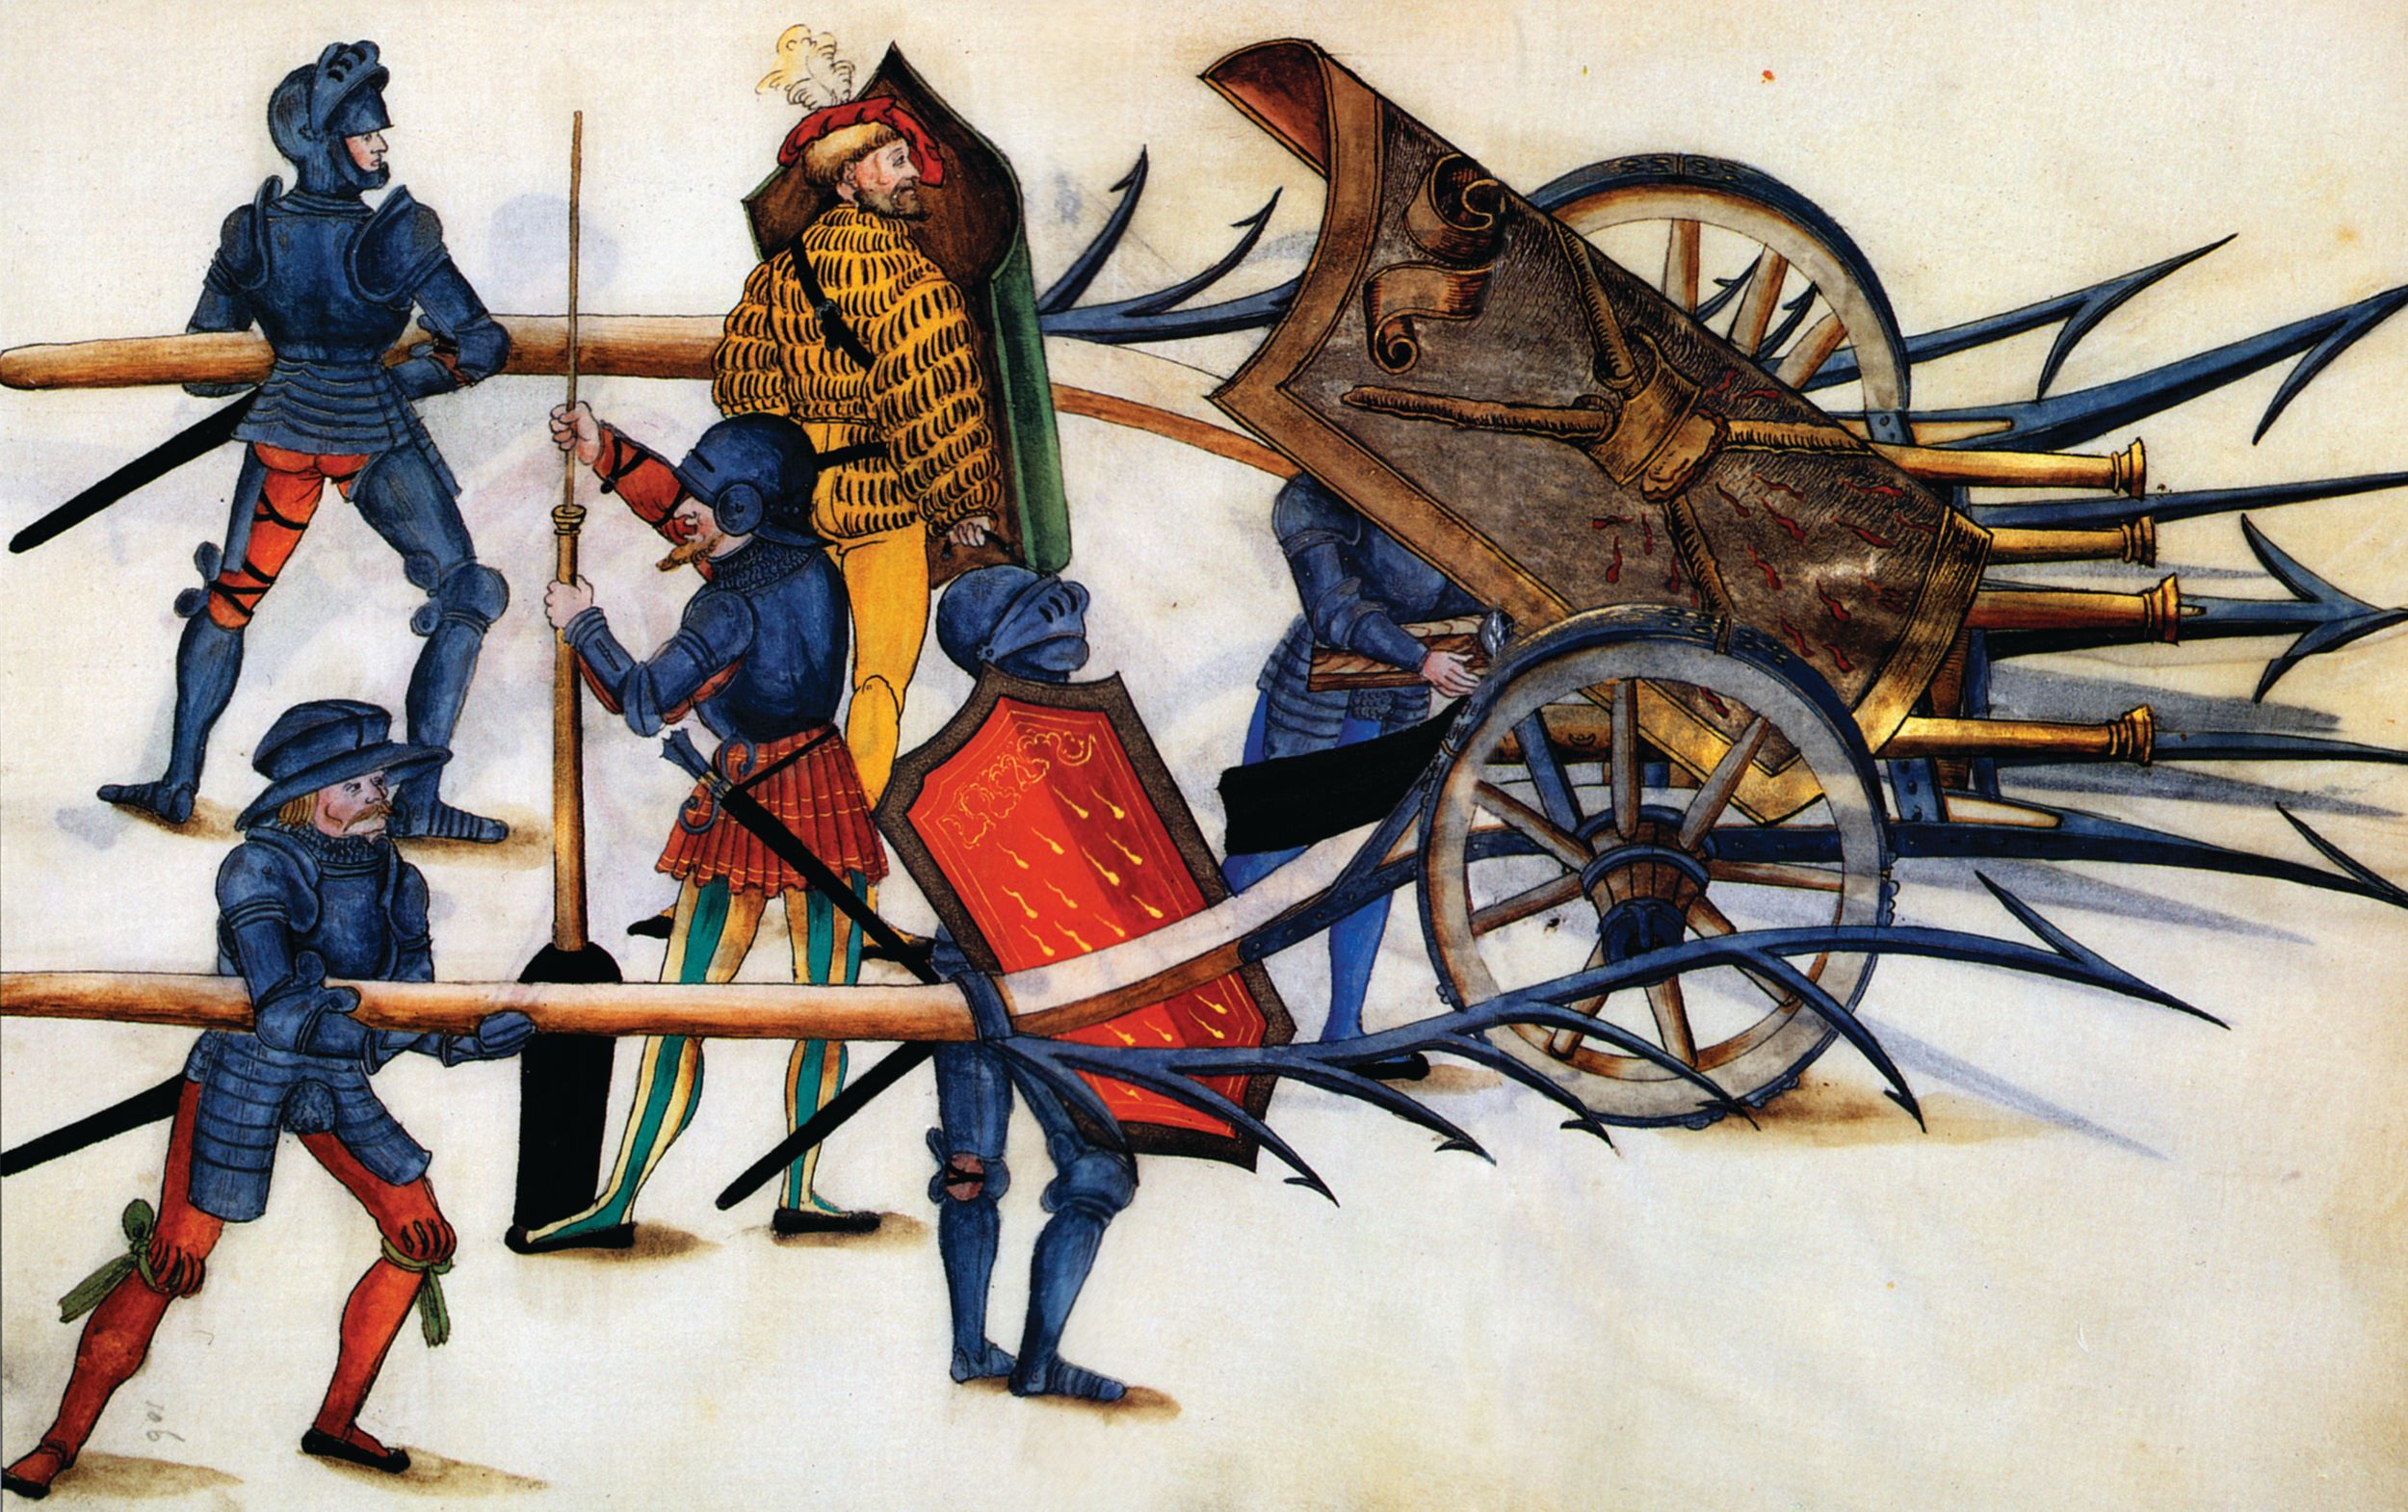 At Ravenna the Spanish mounted heavy arquebuses on carts bristling with spears and shields. They were too large for one man to lift and fire.